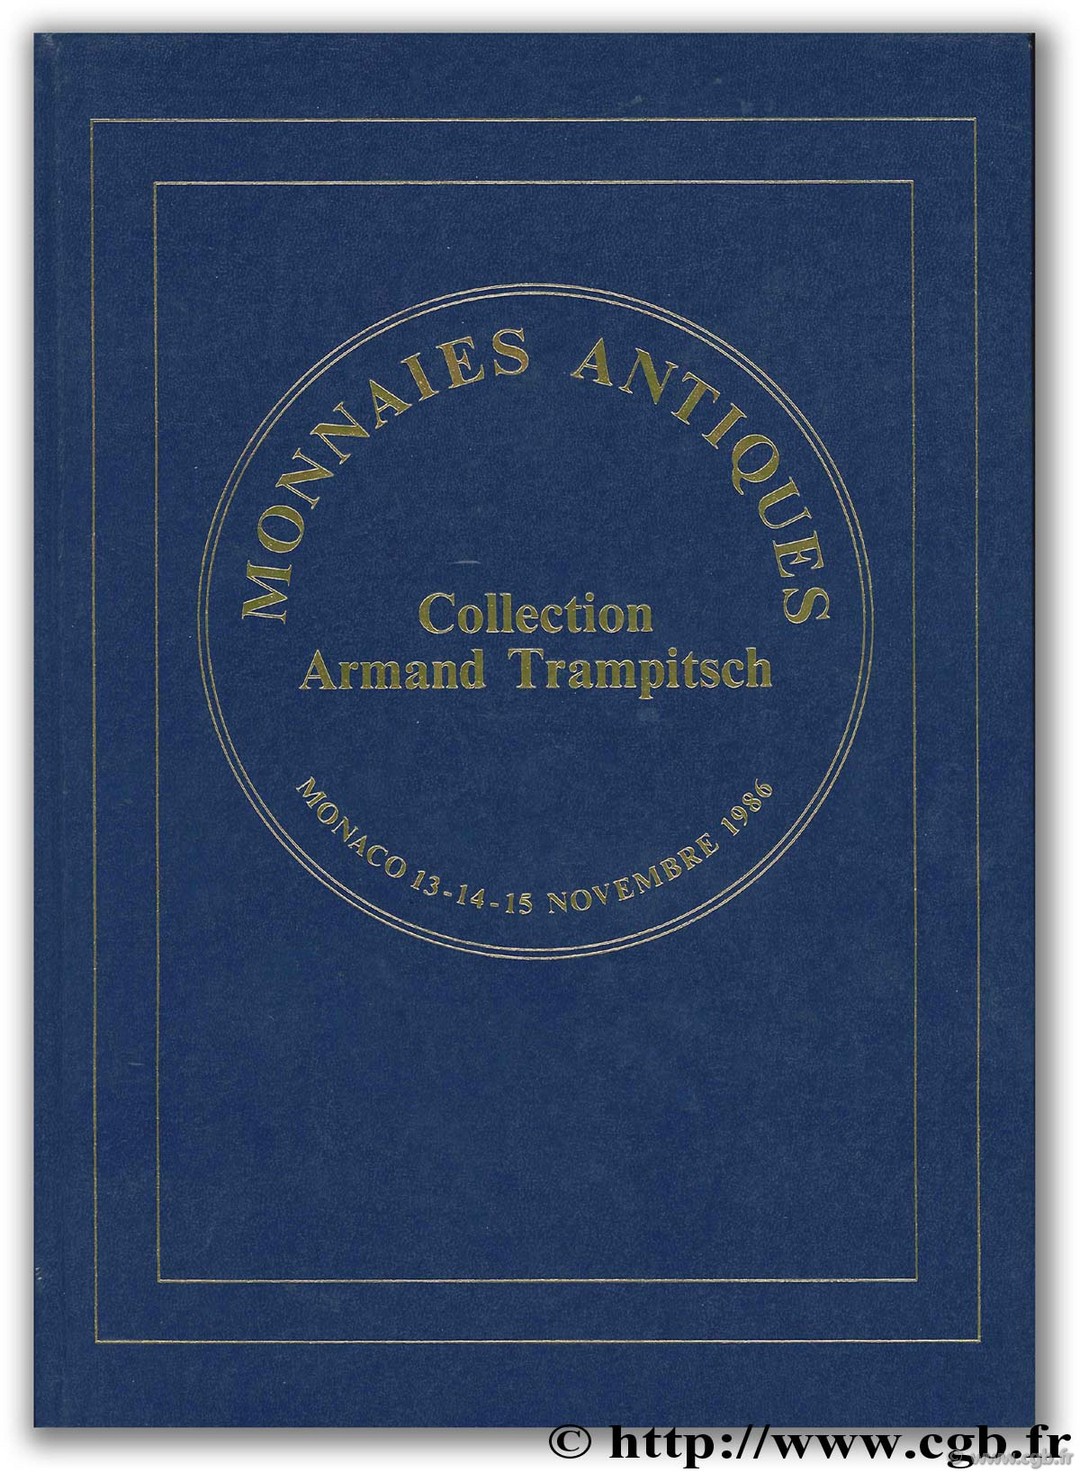 Monnaies antiques, collection Armand Trampitsch 